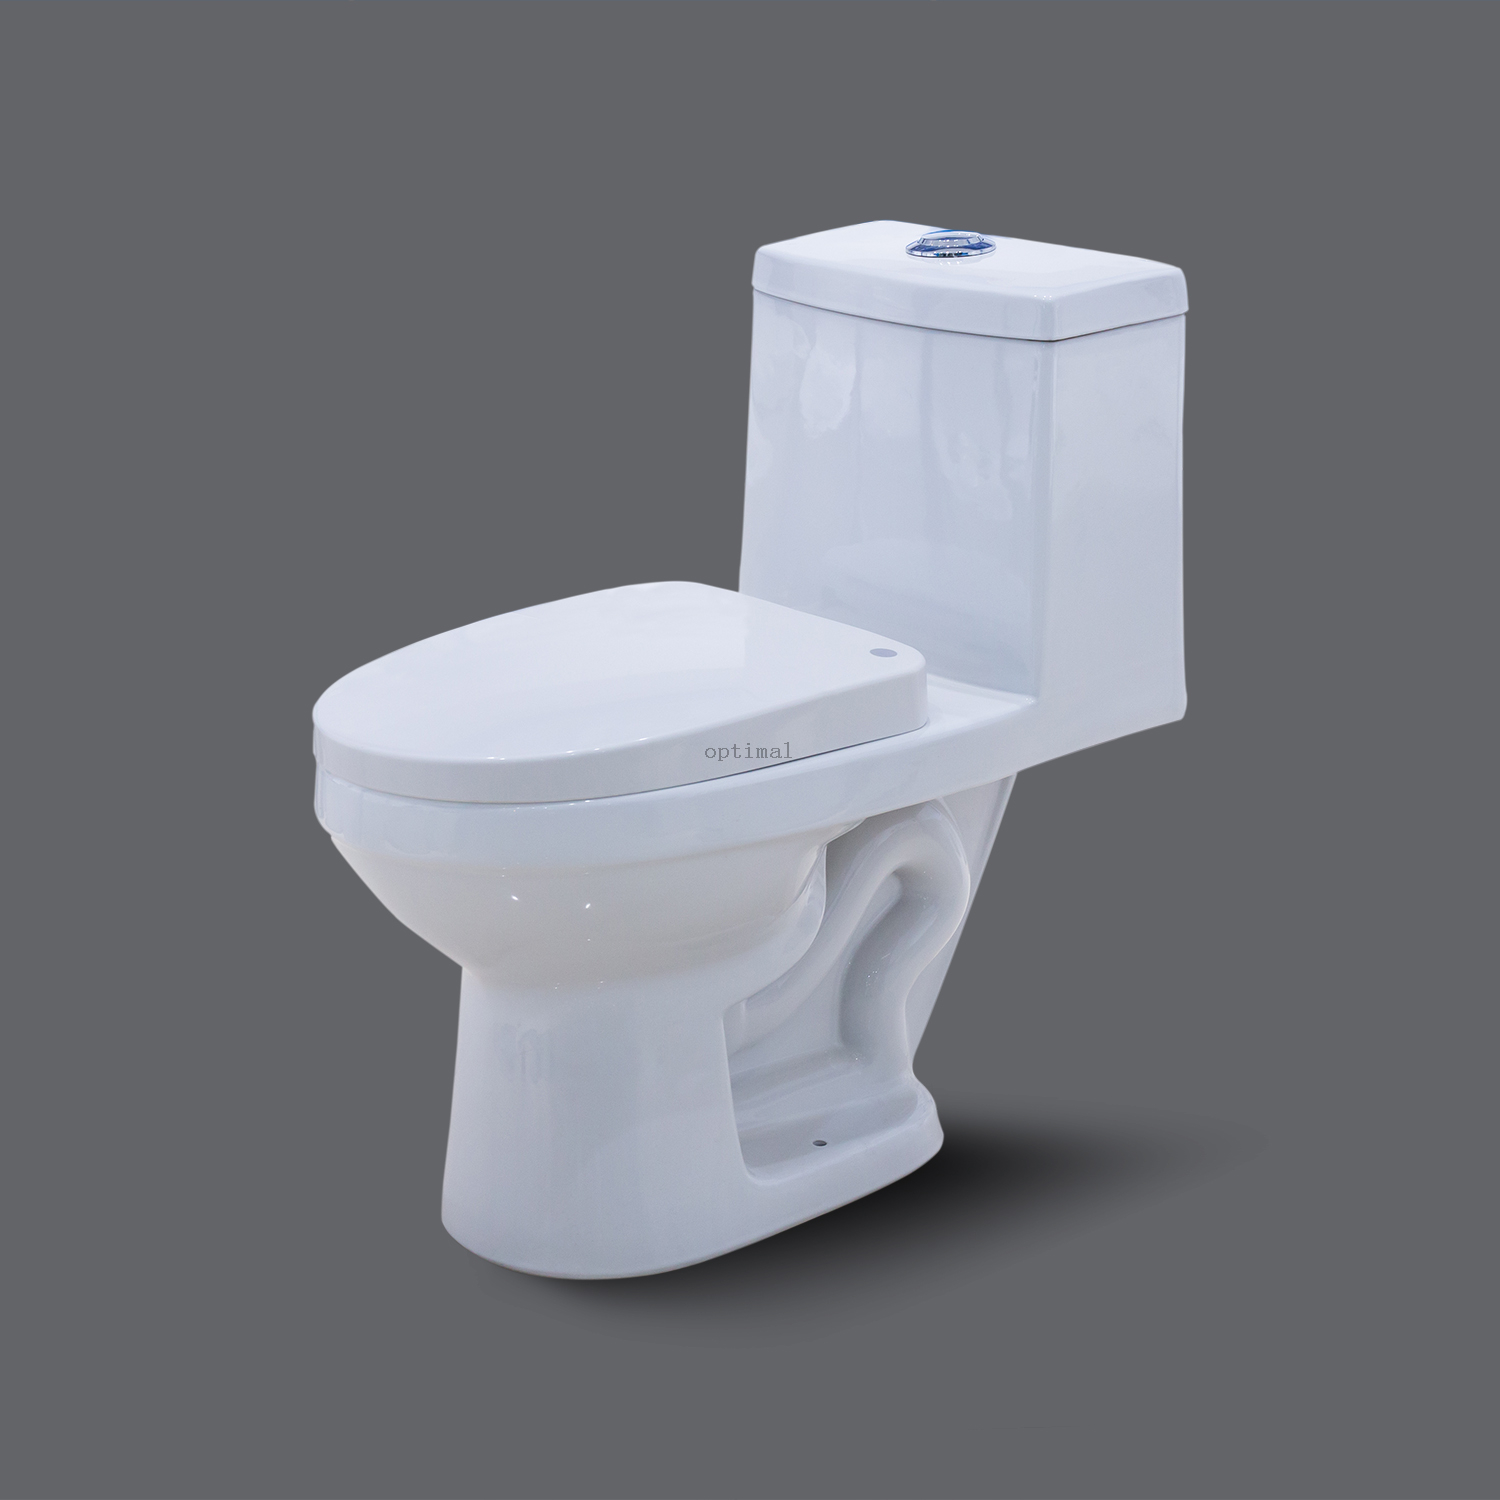 Bathroom Sanitary Ware Economic Hot Selling Design Rimless Siphonic One-Piece Toilet S-Trap 300mm